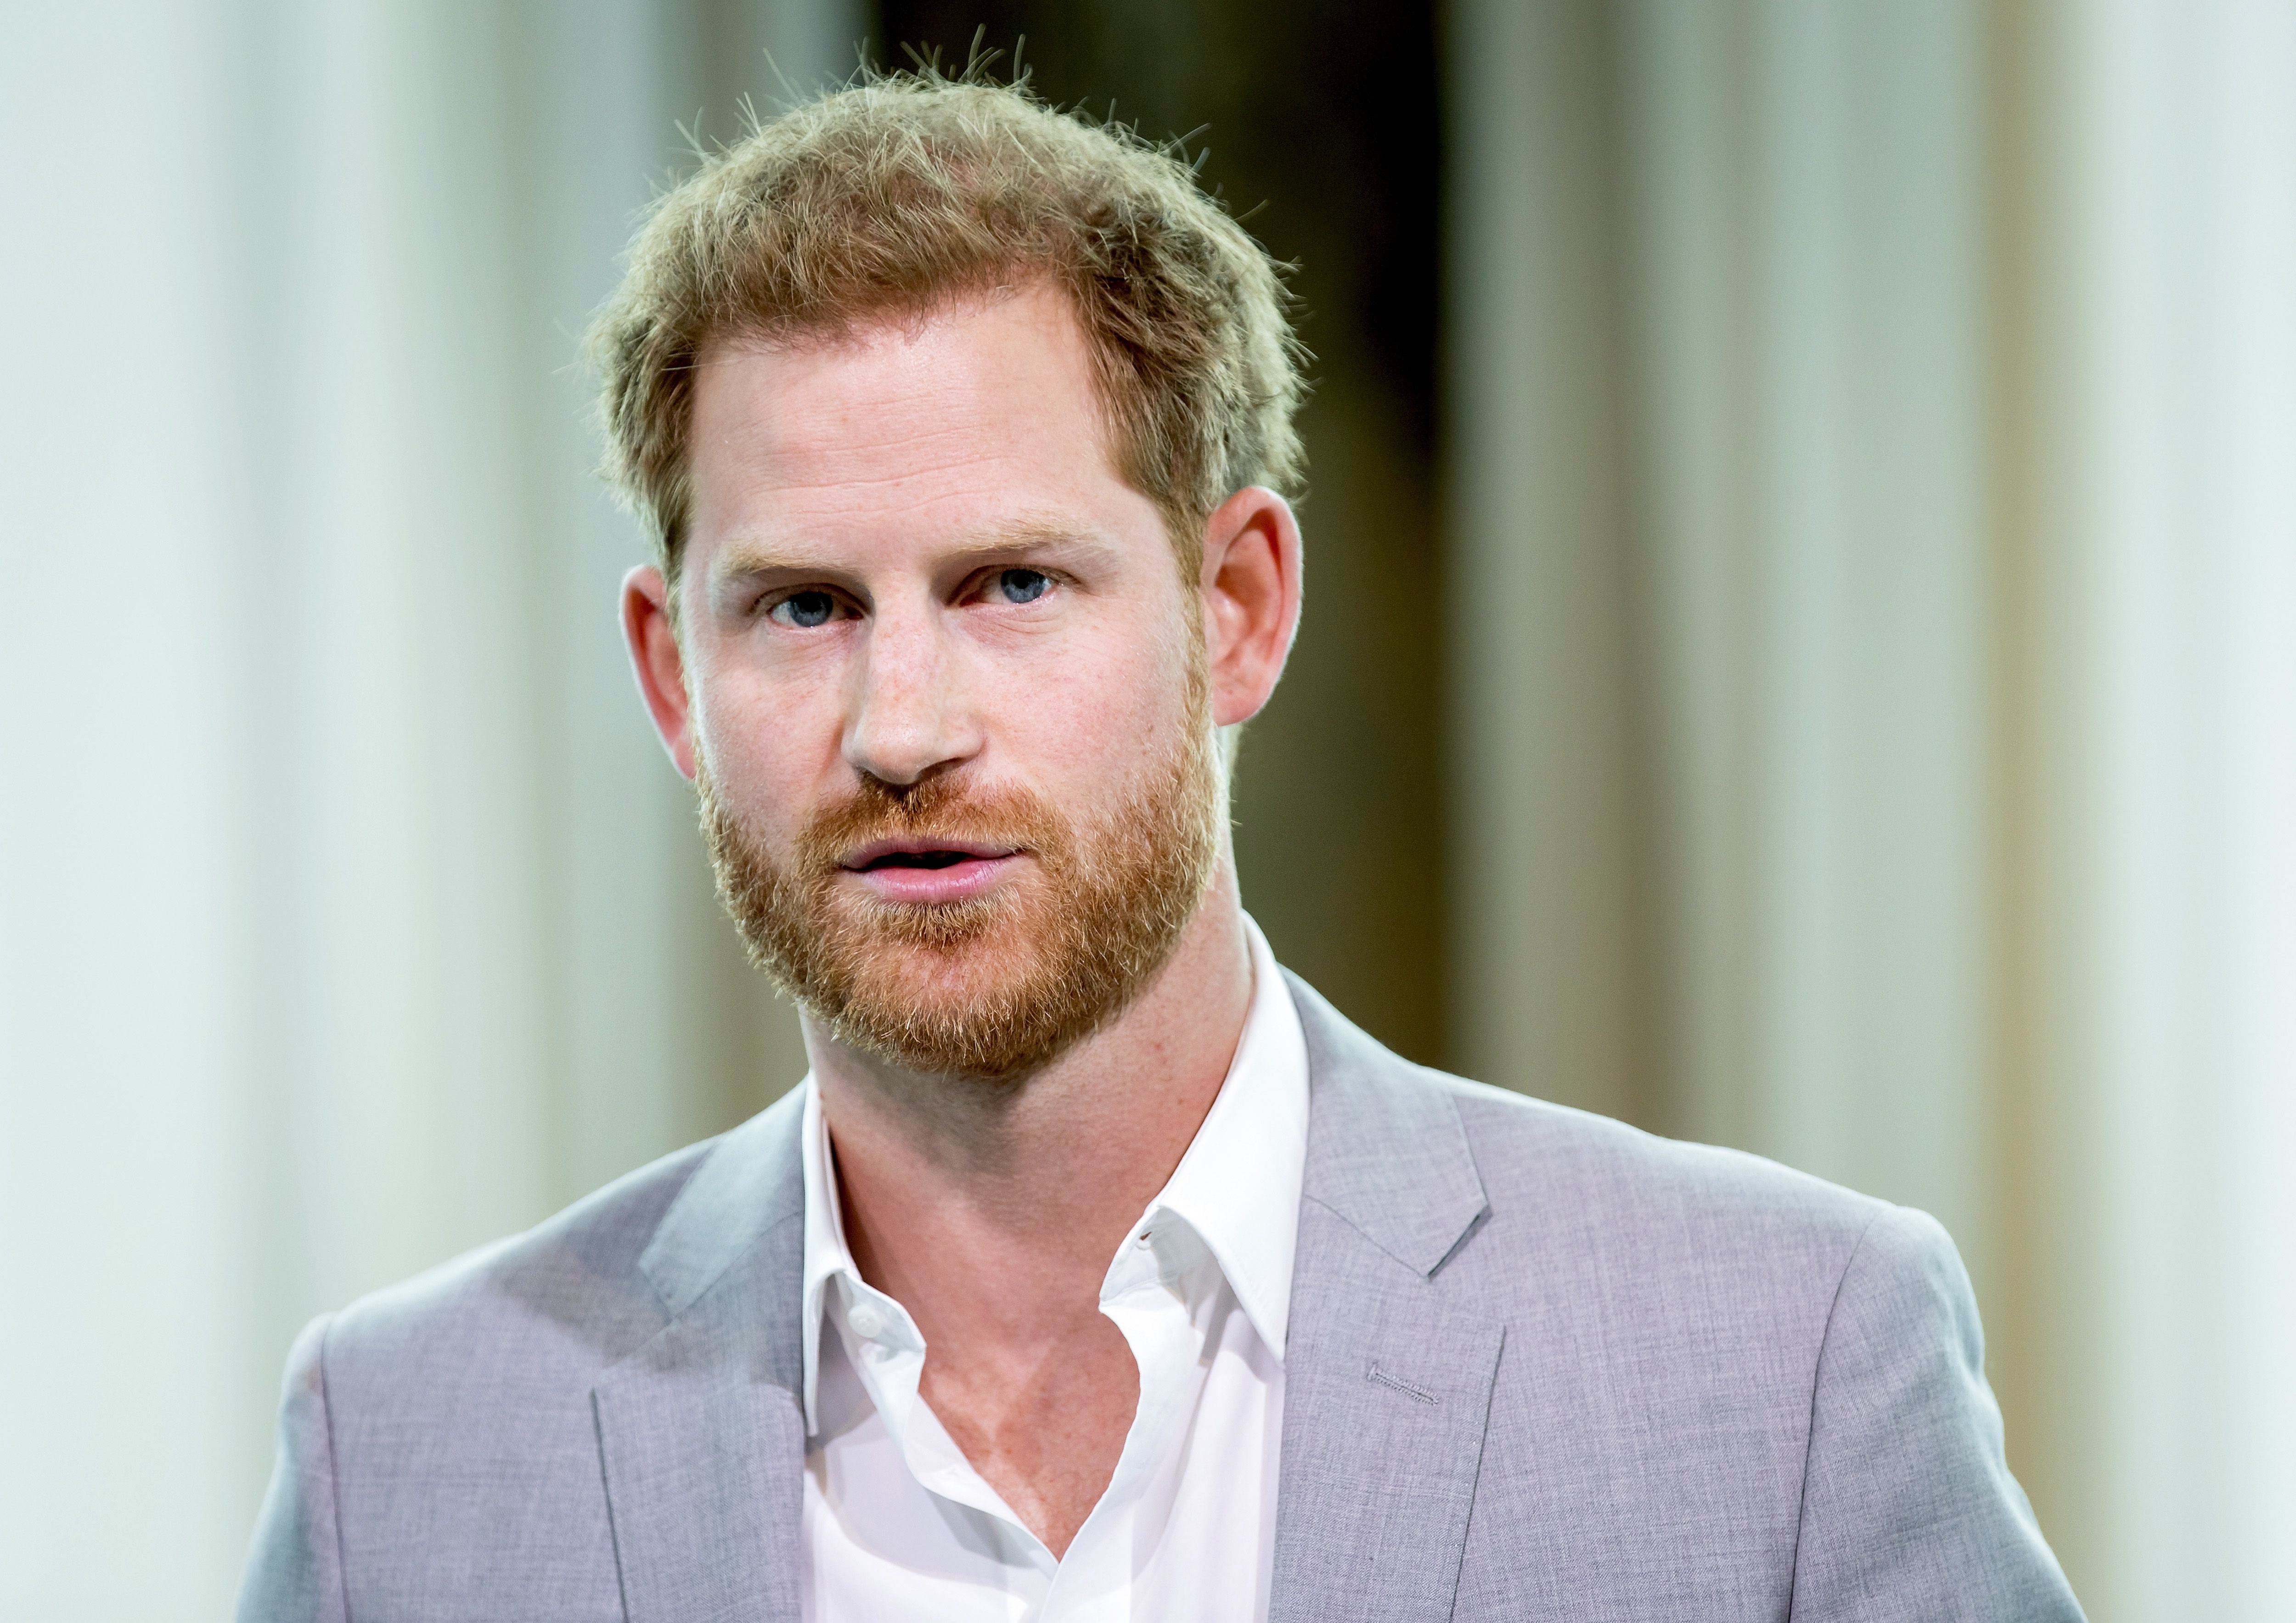 Prince Harry in a gray suit